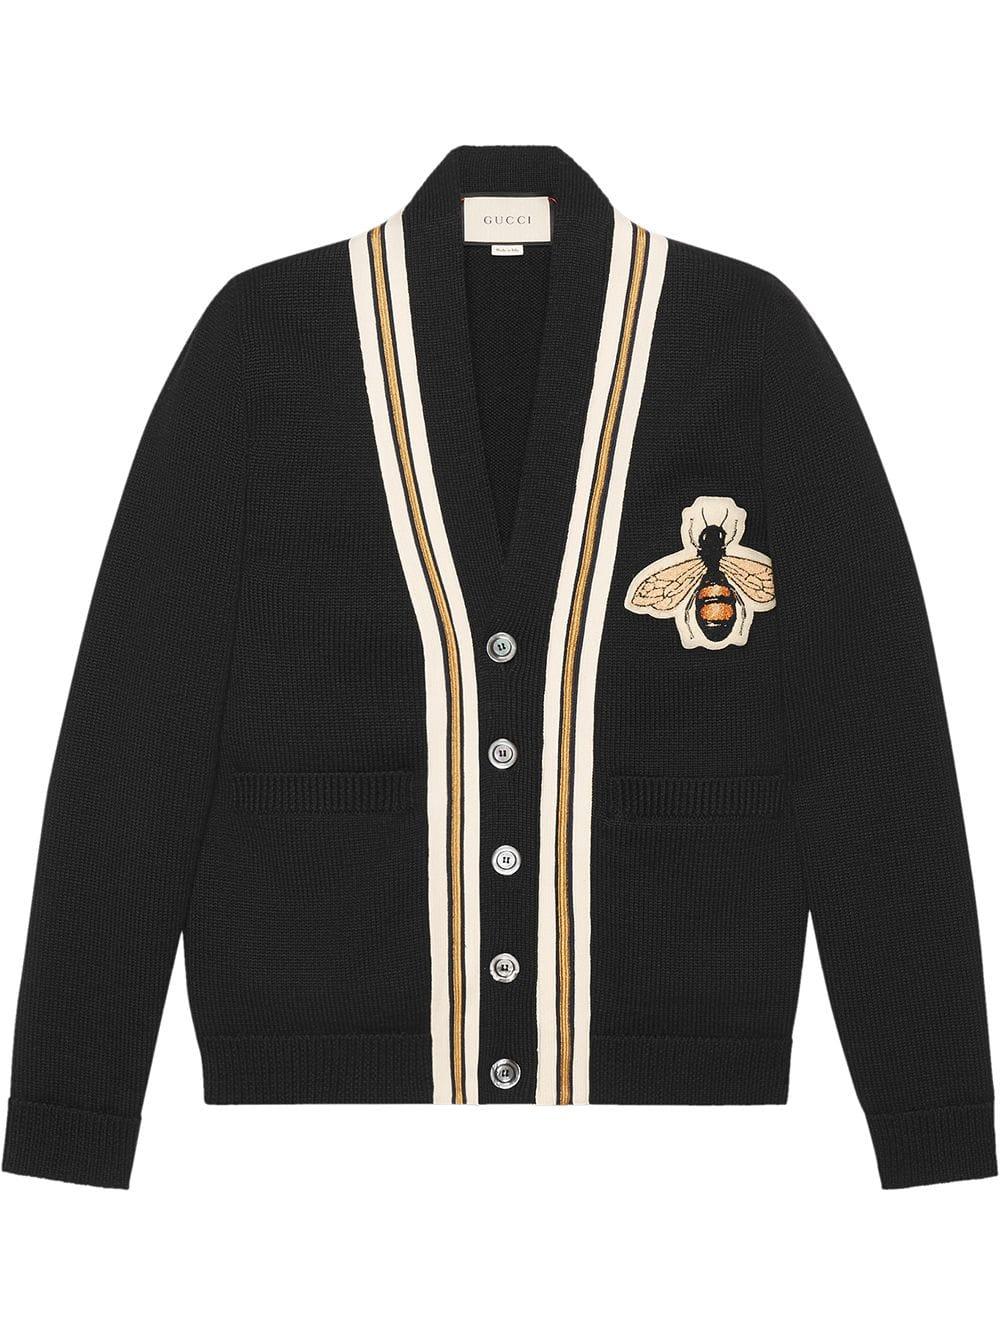 Gucci Wool Cardigan With Bee Appliqué in Black for Men | Lyst